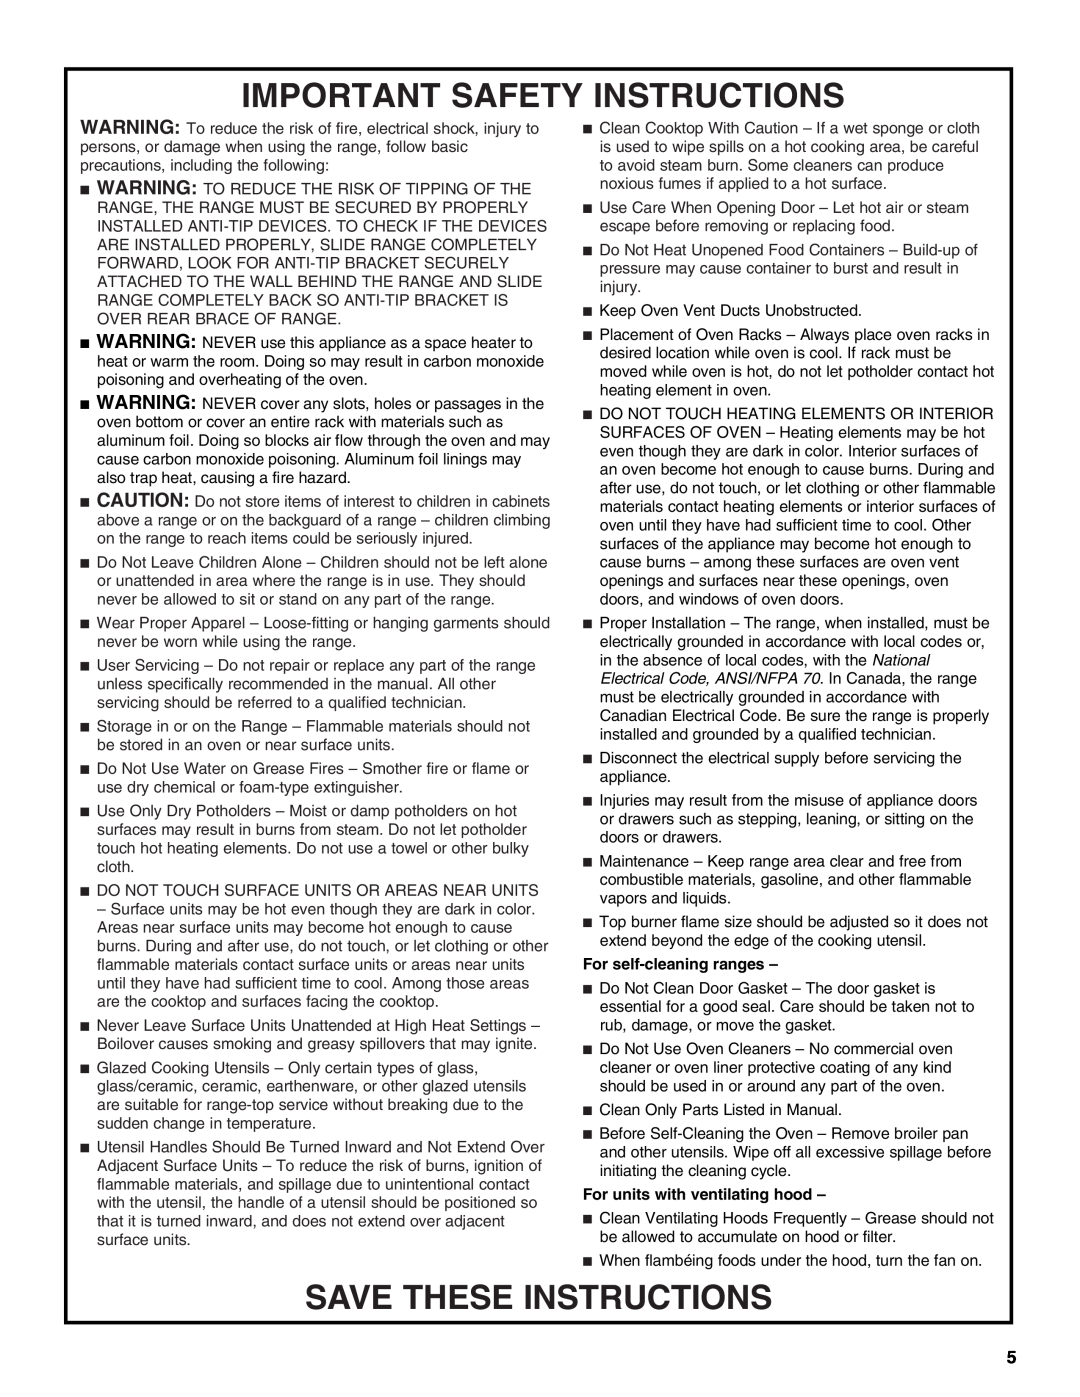 KitchenAid KDRP407 KDRP462 manual Important Safety Instructions, Save These Instructions, For self-cleaning ranges 